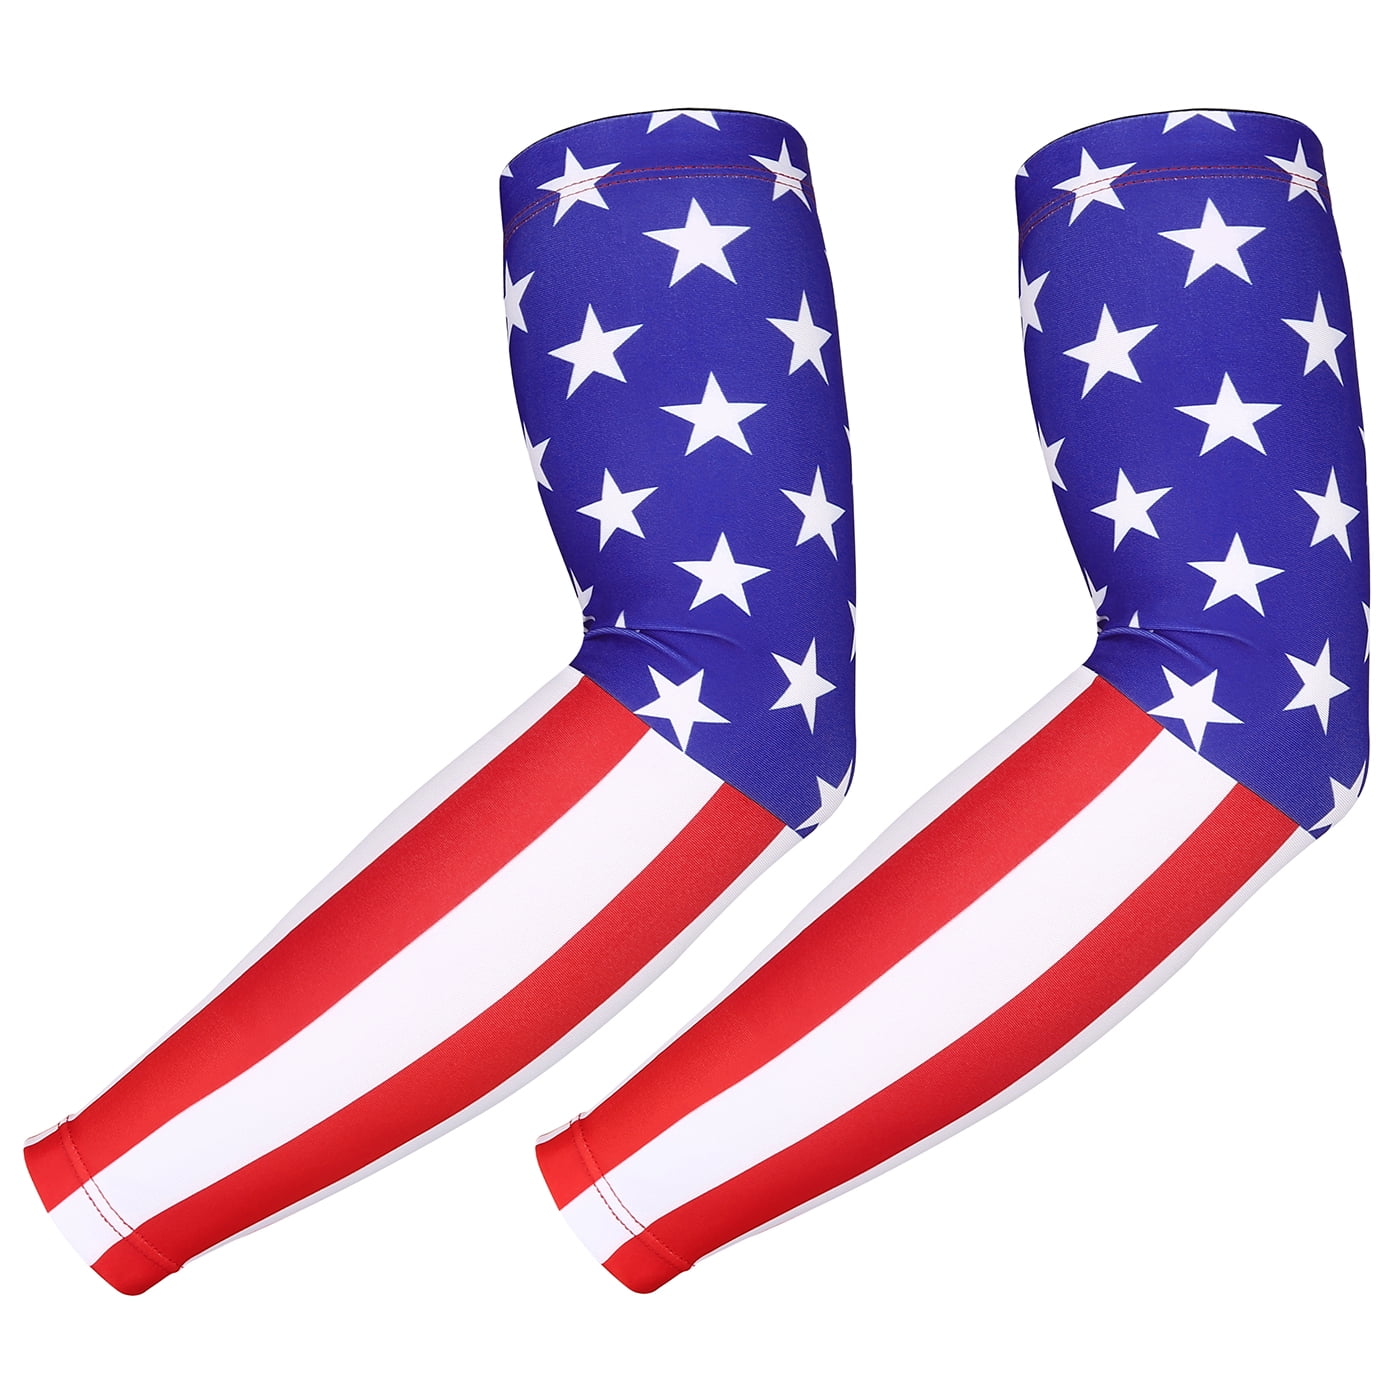 Arm Sleeves Flag Fireworks Mens Sun UV Protection Sleeves Arm Warmers Cool Long Set Covers